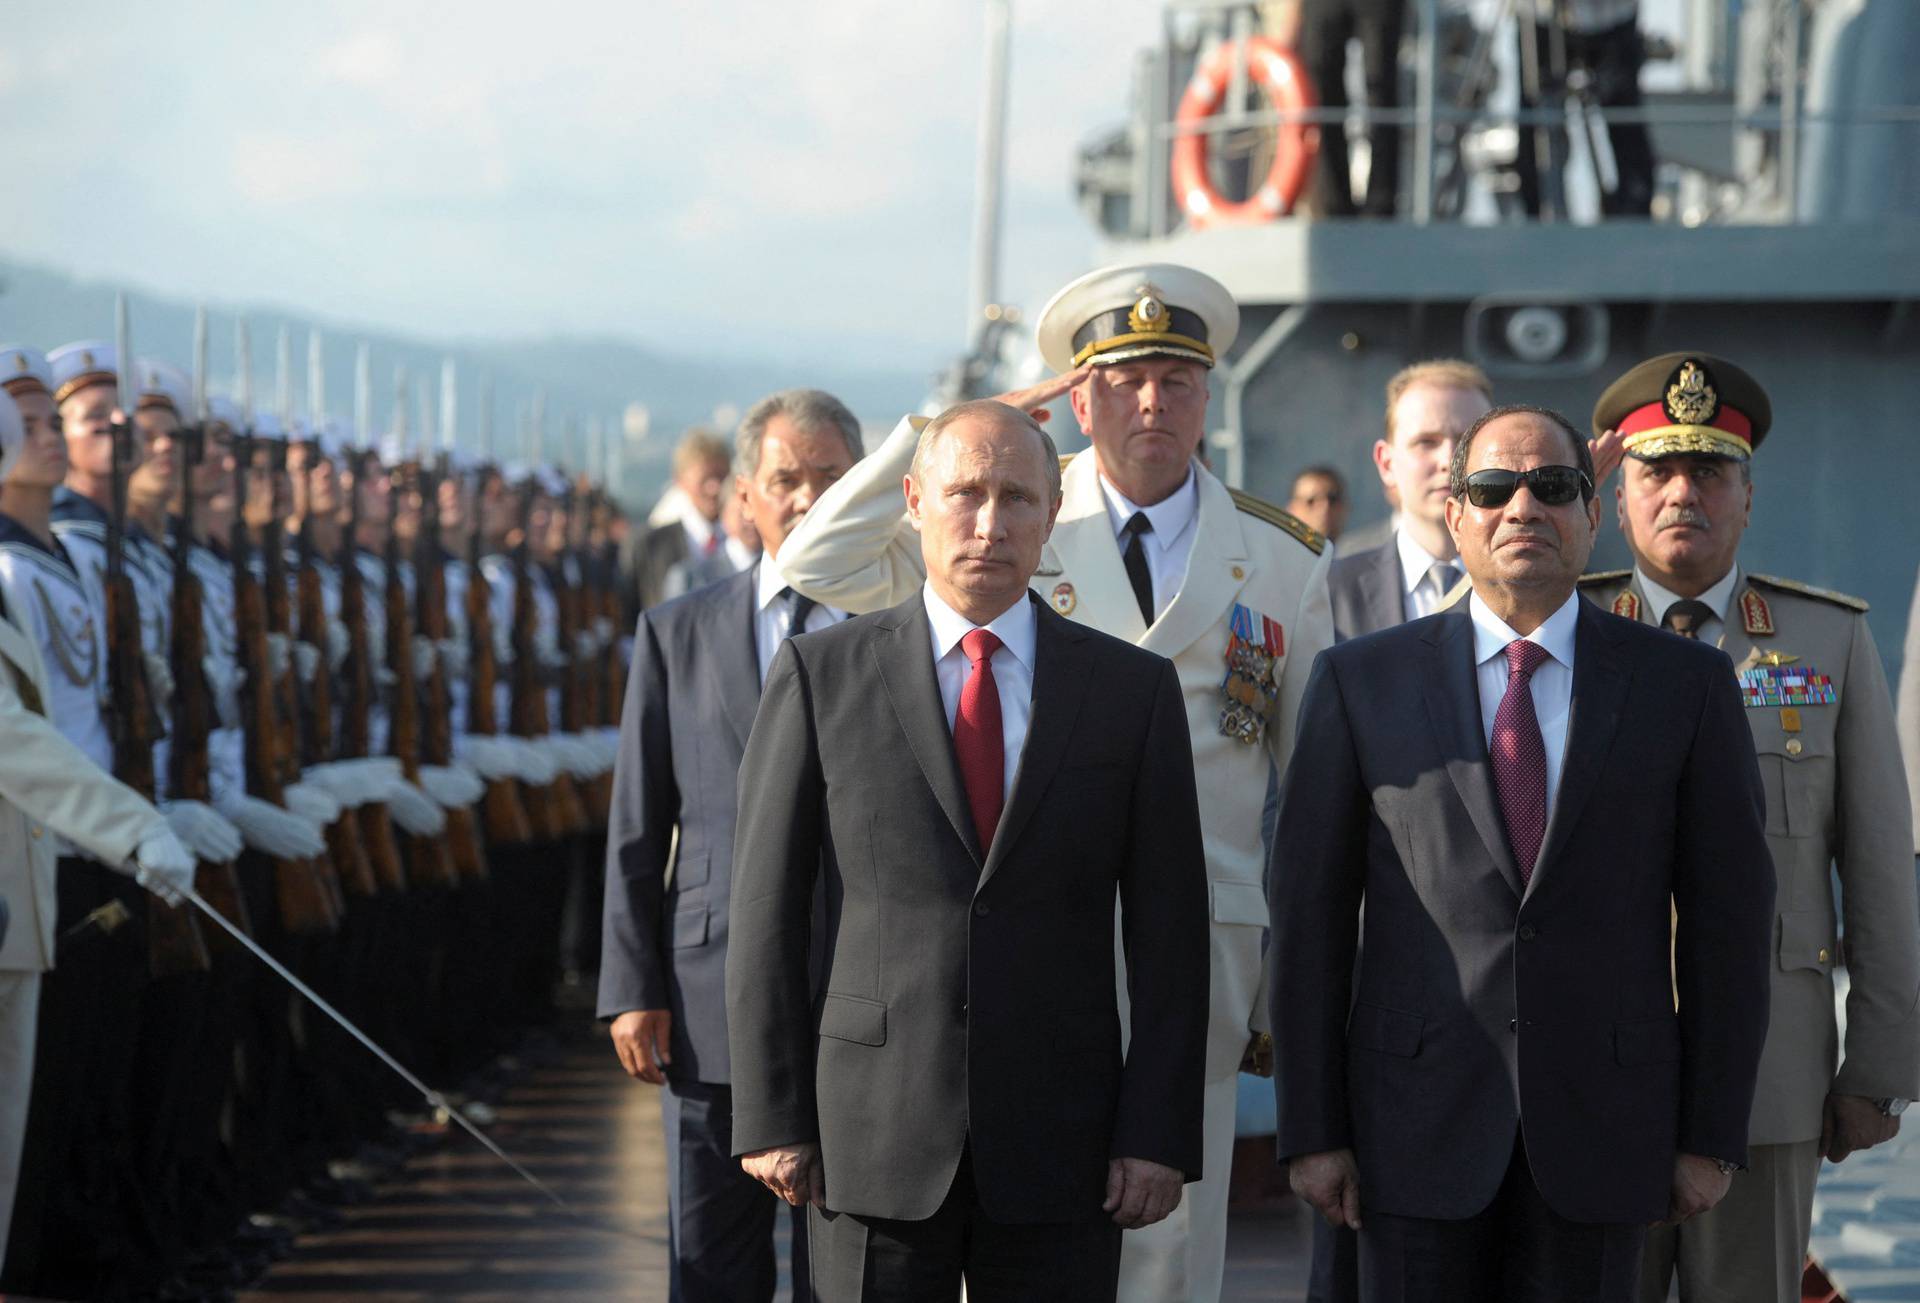 FILE PHOTO: Russia's President Putin, his Egyptian counterpart Sisi and Russia's Defence Minister Shoigu attend a welcoming ceremony onboard guided missile cruiser Moskva in Sochi